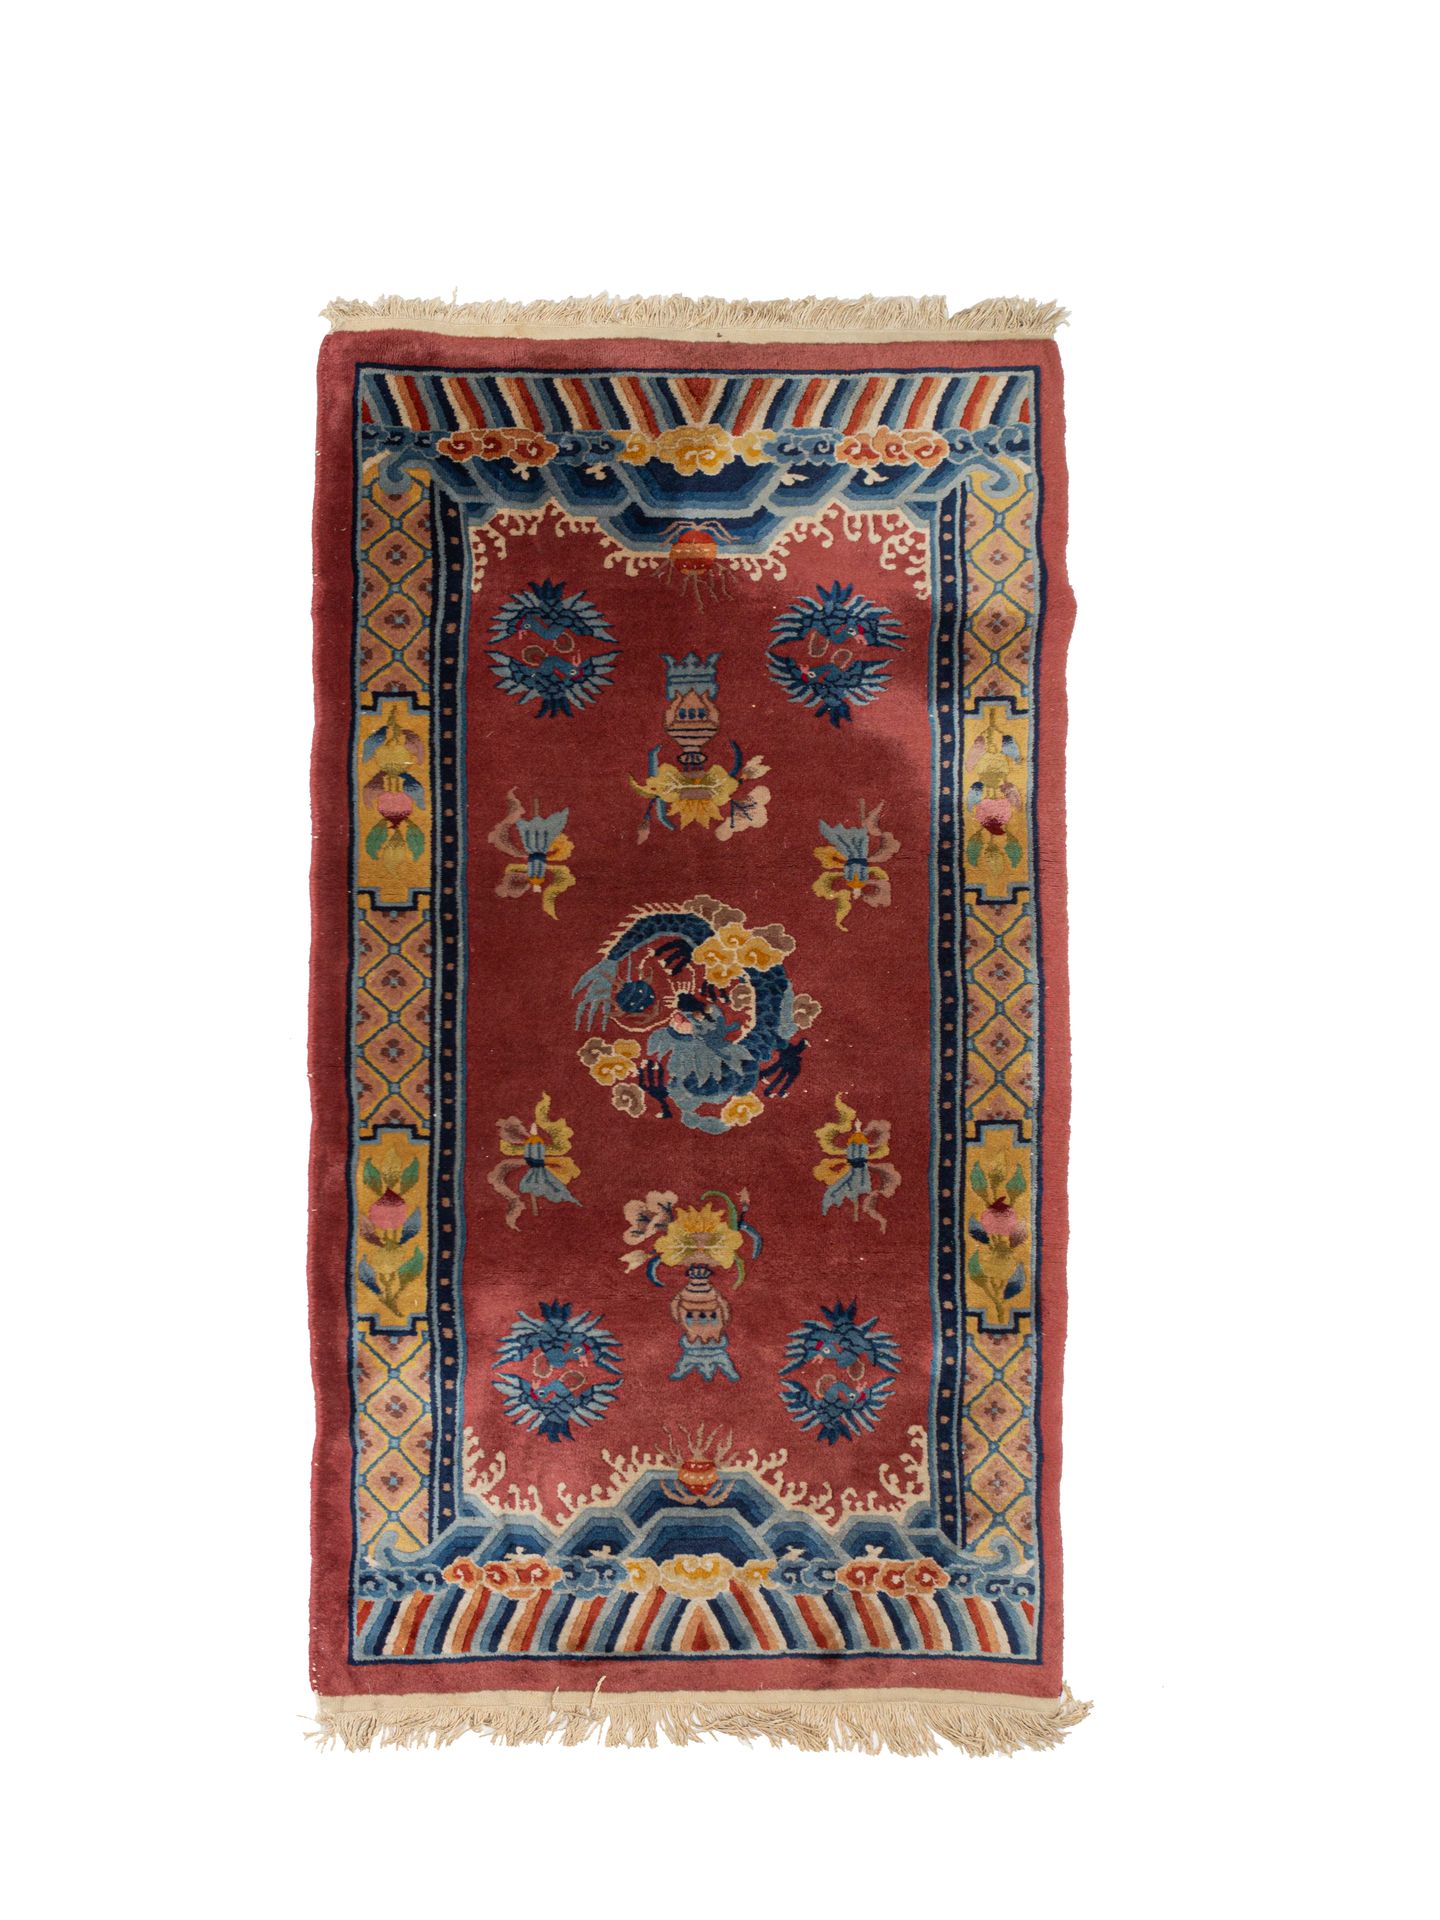 Null Carpet China Shanghaï middle XXth century

Plum field with eight phoenixes &hellip;